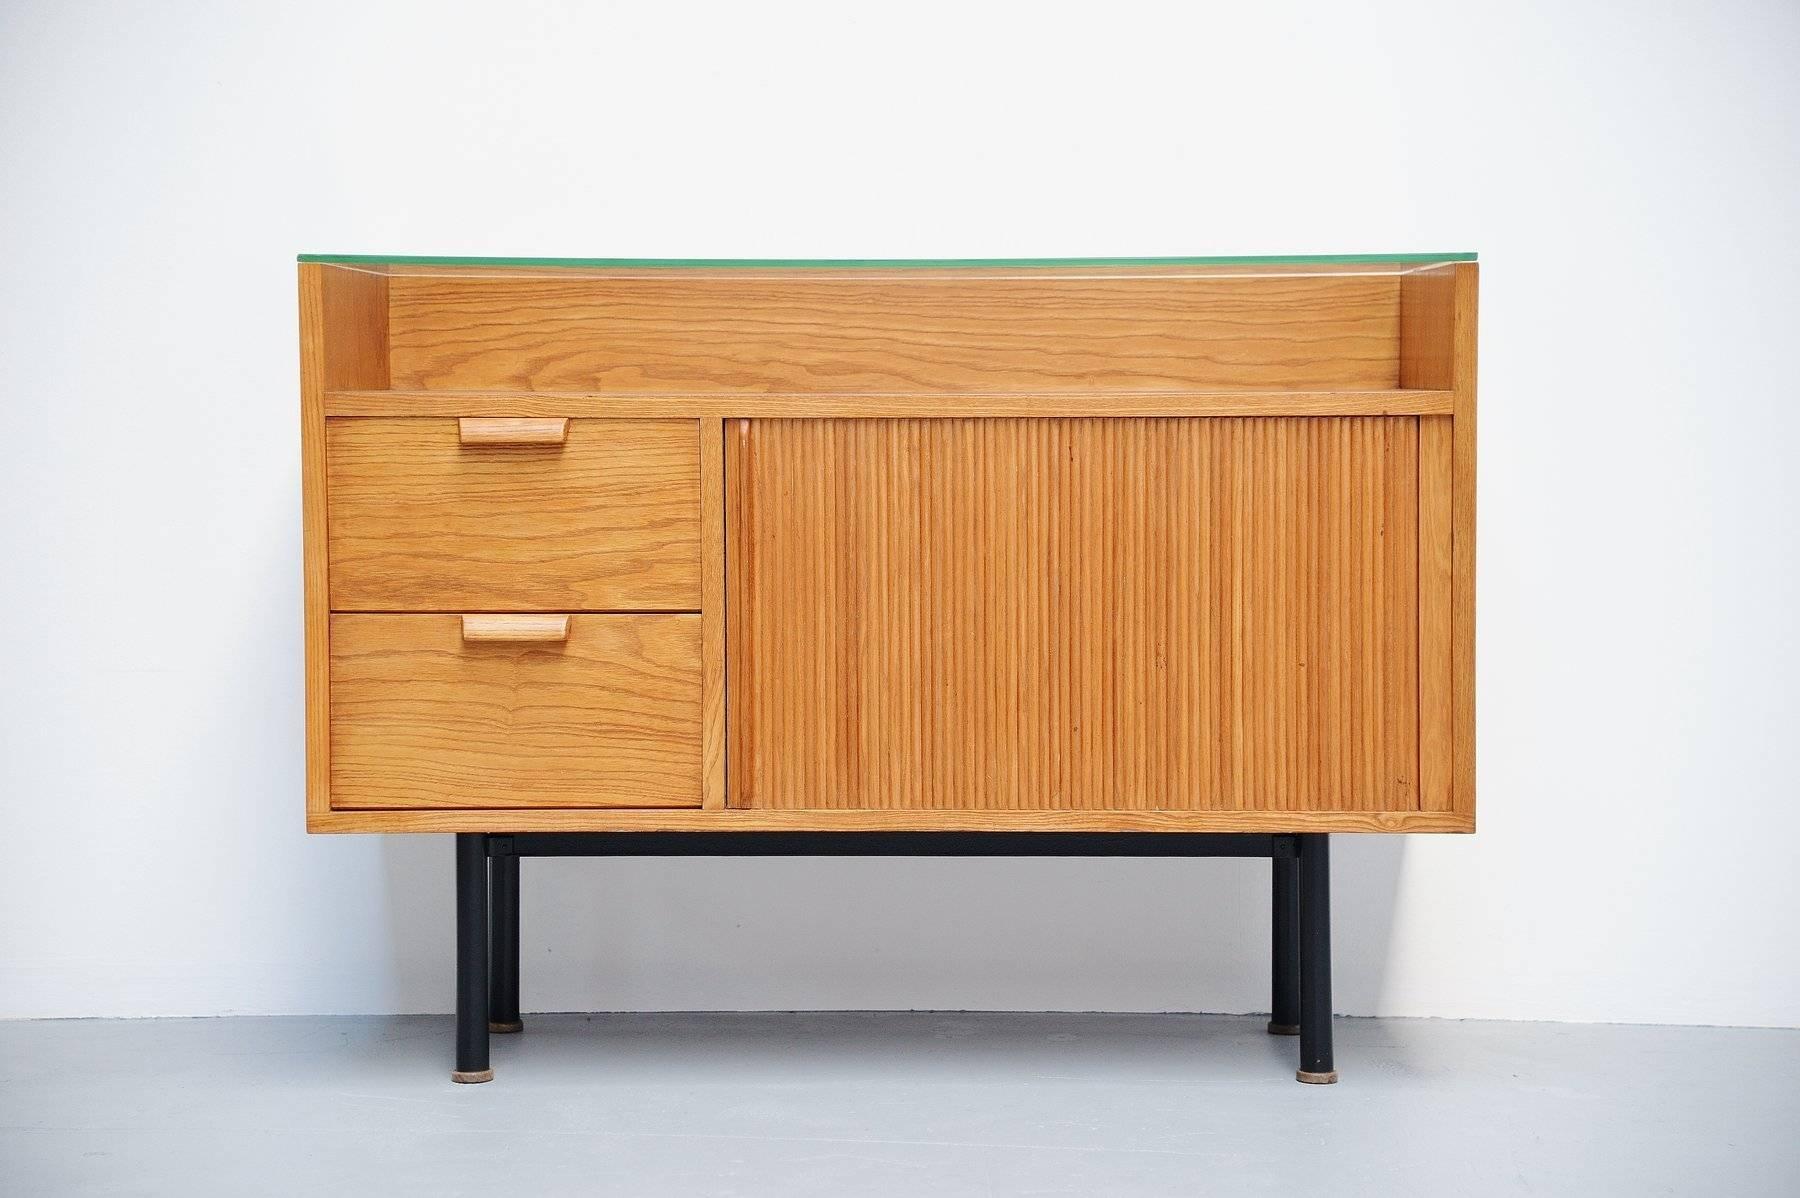 Super rare small showcase cabinet designed by Hein Salomonson for AP Originals, Holland, 1958. We purchased these from an old employee of AP Originals who purchased them at the time, even helped making them. This cabinet was made of birchwood veneer